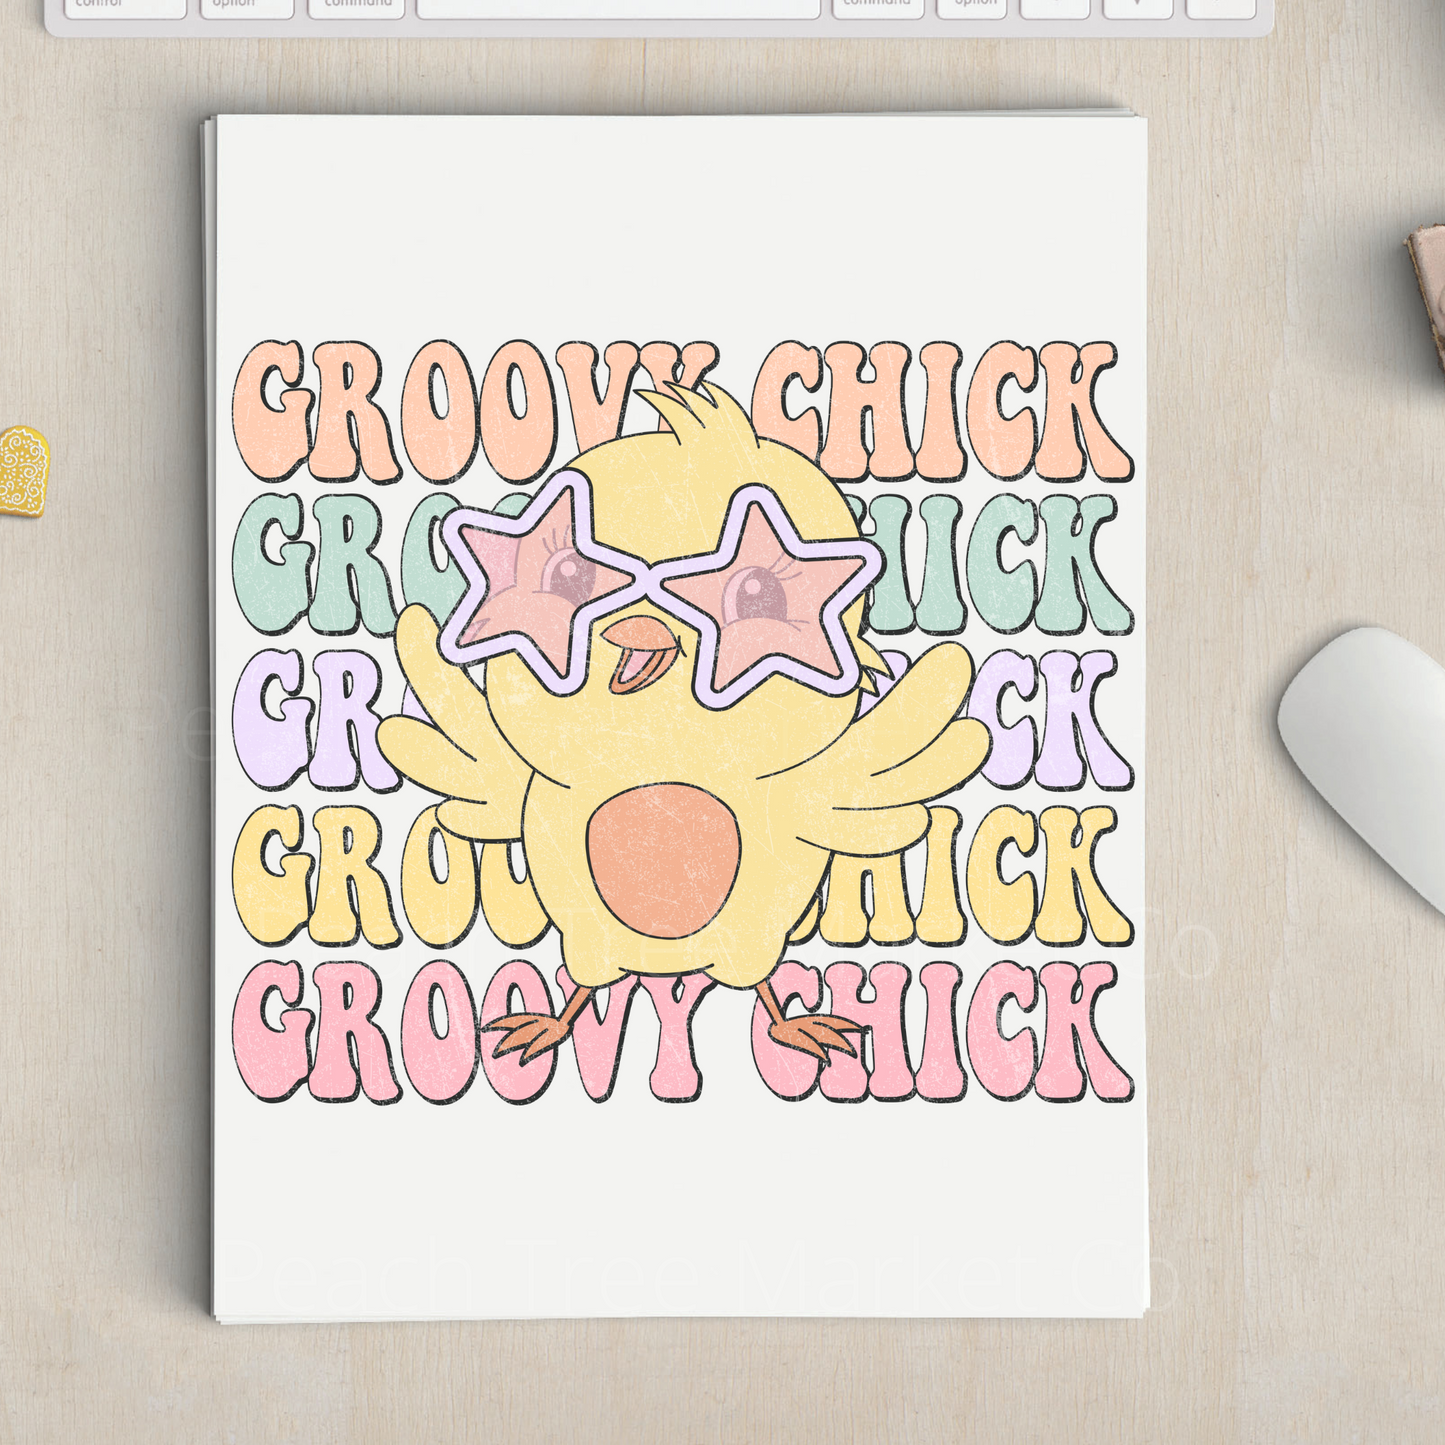 Groovy Chick Sublimation Transfer